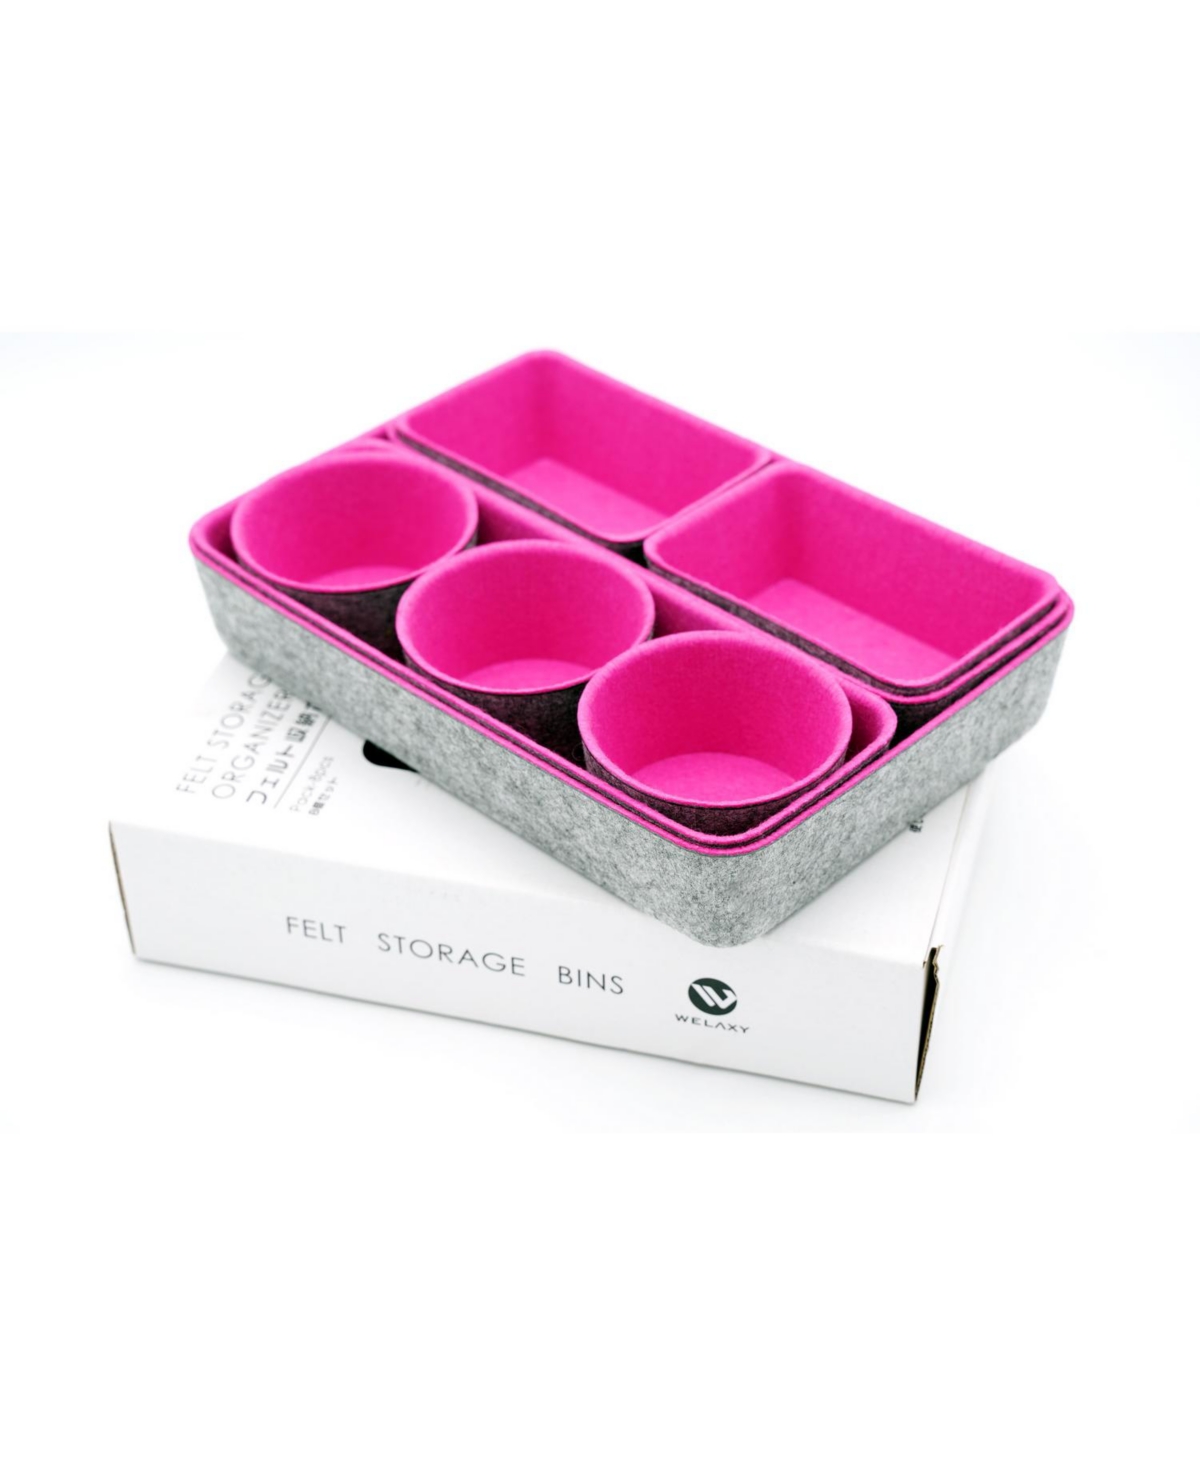 Welaxy 8 Piece Felt Drawer Organizer Set With Round Cups And Trays In Hot Pink